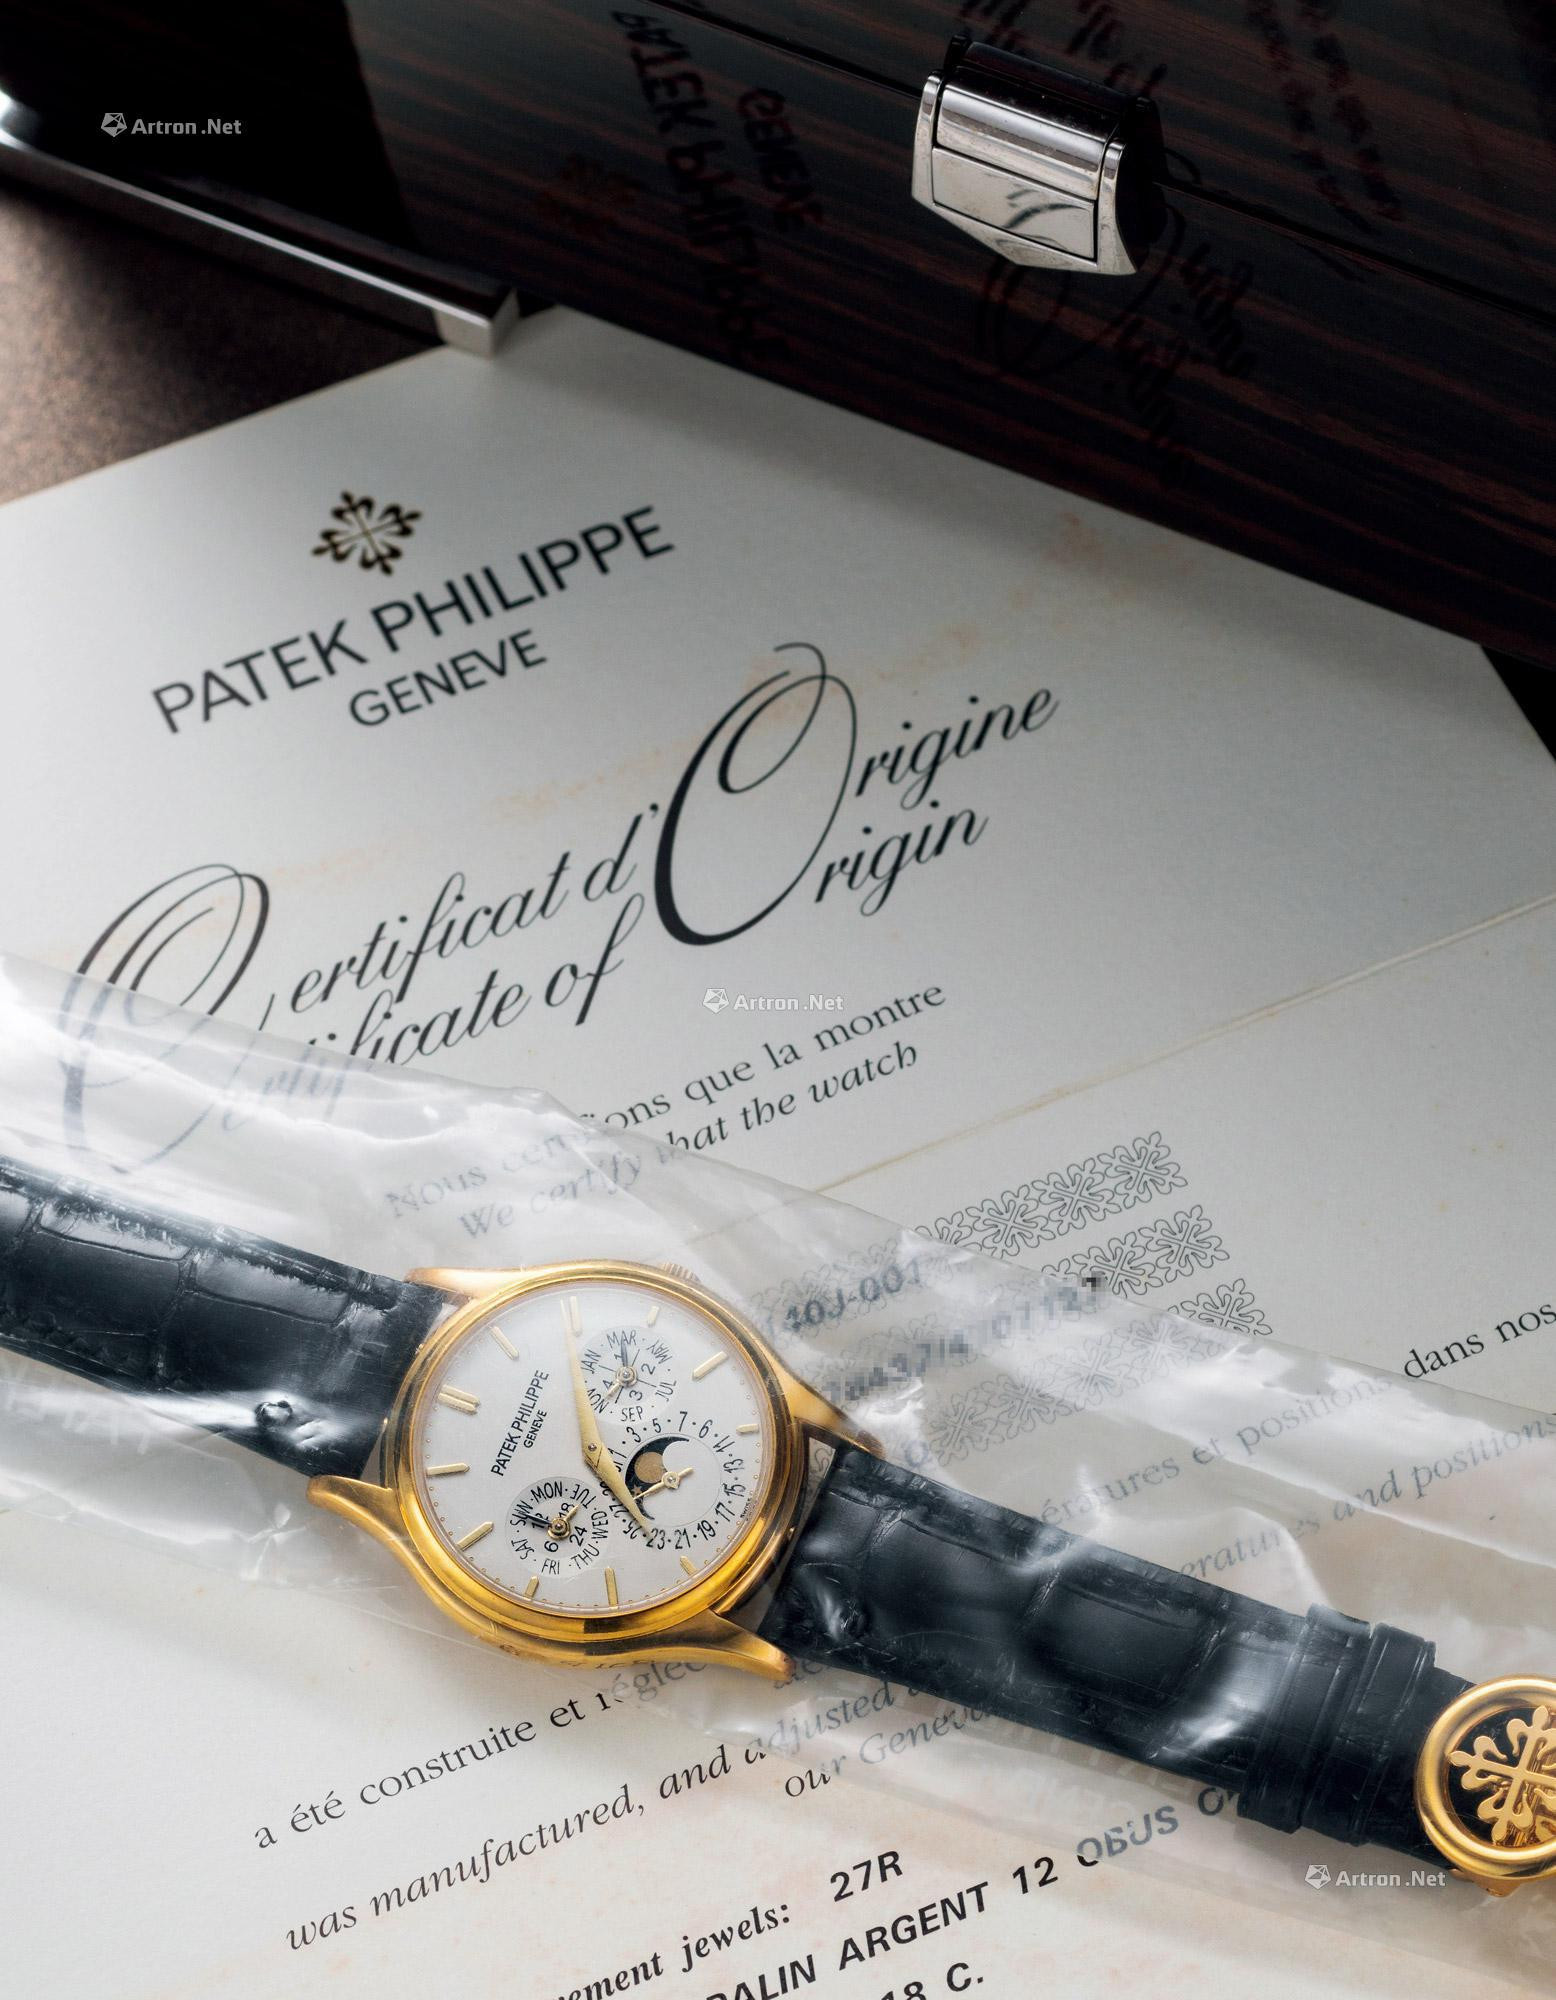 PATEK PHILIPPE  A VERY FINE YELLOW GOLD PERPETUAL CALENDAR AUTOMATIC WRISTWATCH， WITH DATE， DAY， MONTH， LEAP YEAR， 24-HOUR AND MOON PHASES INDICATORS， IN SINGLE SEALED CONDITION， CERTIFICATE OF ORIGINL AND PRESENTATION BOX